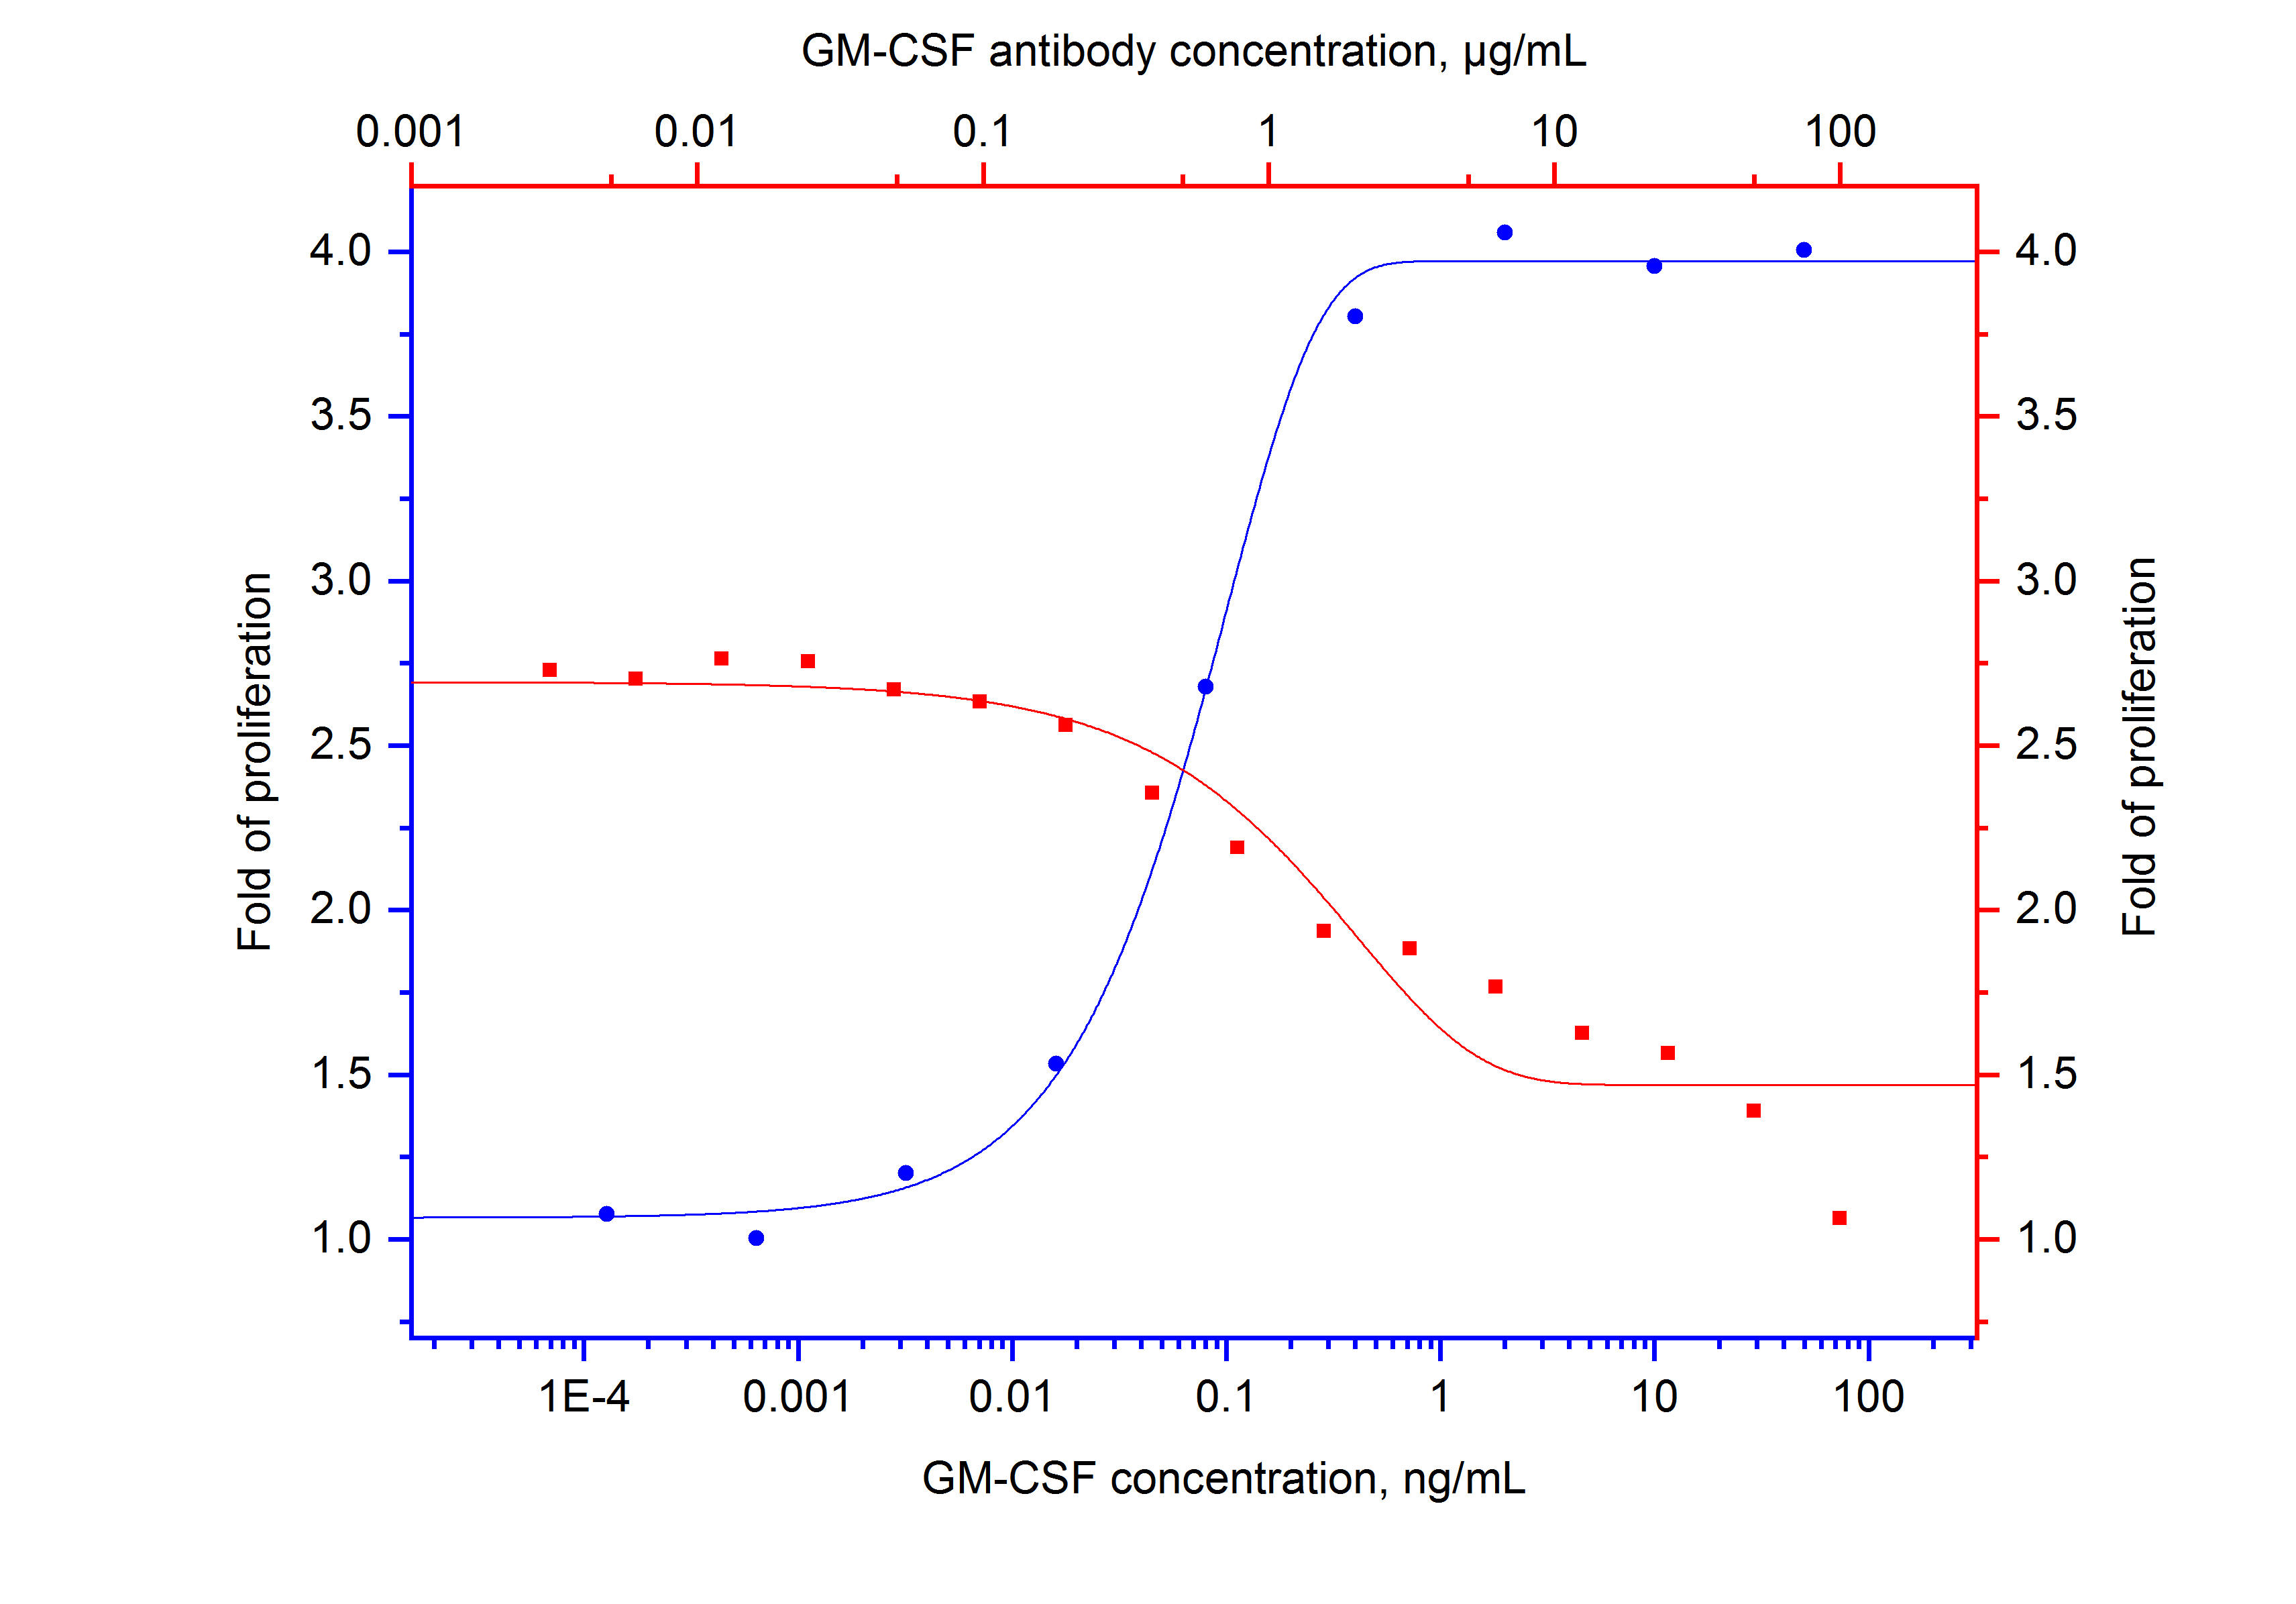 Recombinant human GM-CSF (Cat.NO. HZ-1002) stimulates proliferation of TF-1 cell line (human erythroleukemic cell line) in a dose-dependent manner (blue curve, refer to bottom X-left Y).  The activity of human GM-CSF (0.2 ng/mL HZ-1002) is neutralized by mouse anti-human GM-CSF monoclonal antibody 69003-1-Ig at serial dose (red curve, refer to top X-right Y). The ND50 is typically 1.5-4 μg/mL.